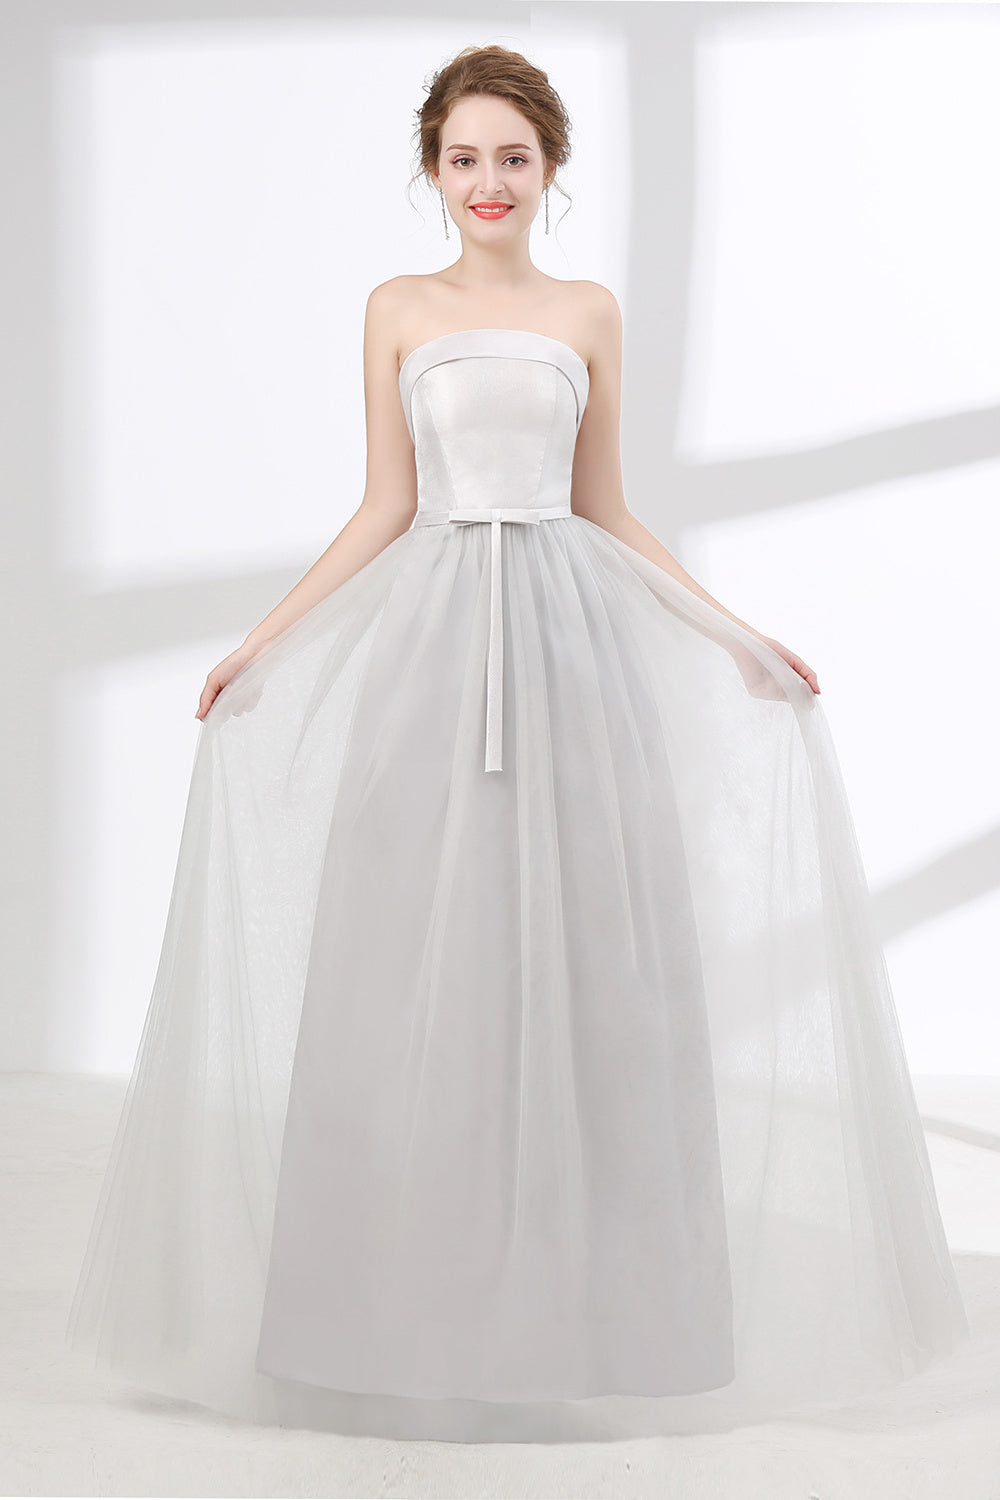 Women Dress, Tulle & Satin Strapless Neckline A-line Bridesmaid Dresses With Bowknot